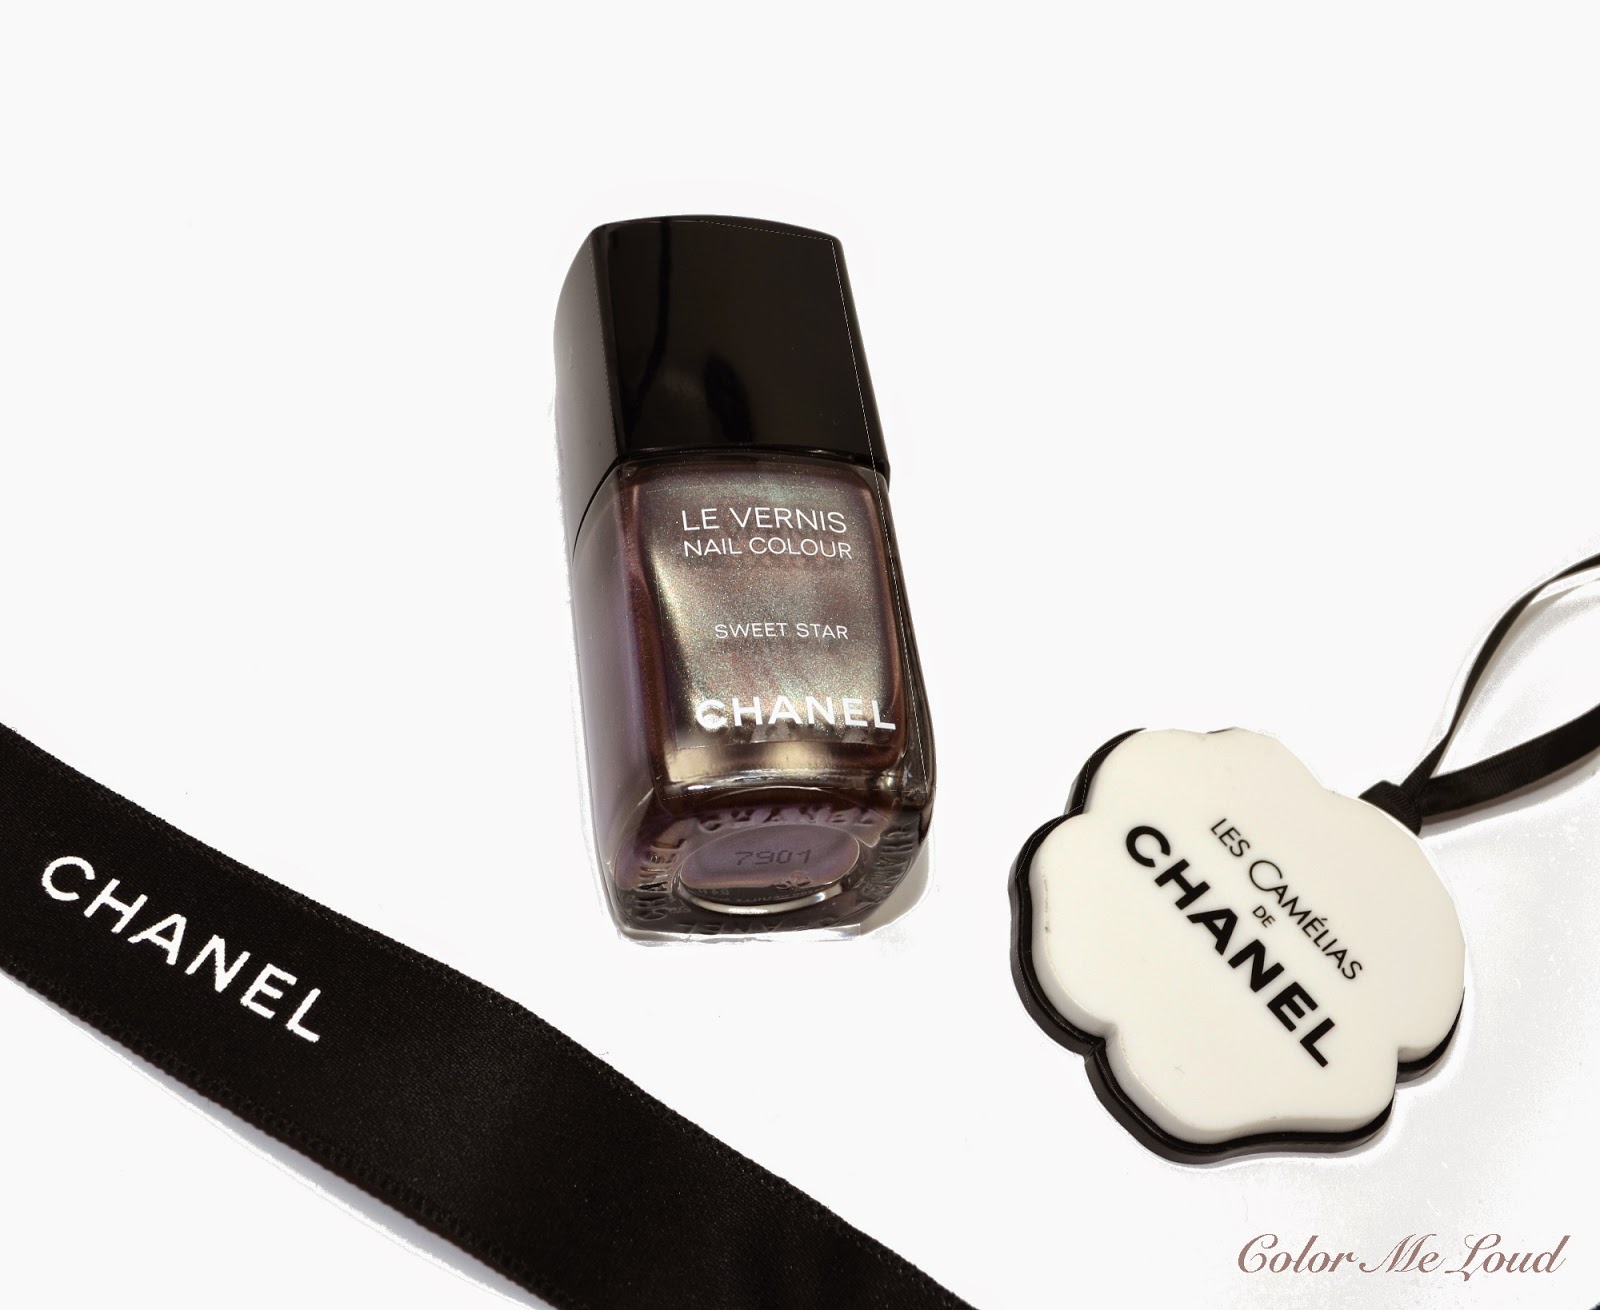 Chanel Le Vernis Sweet Star for Fashion Night Out 2014 Nail Polishes,  Review, Swatch & Comparison, Color Me Loud